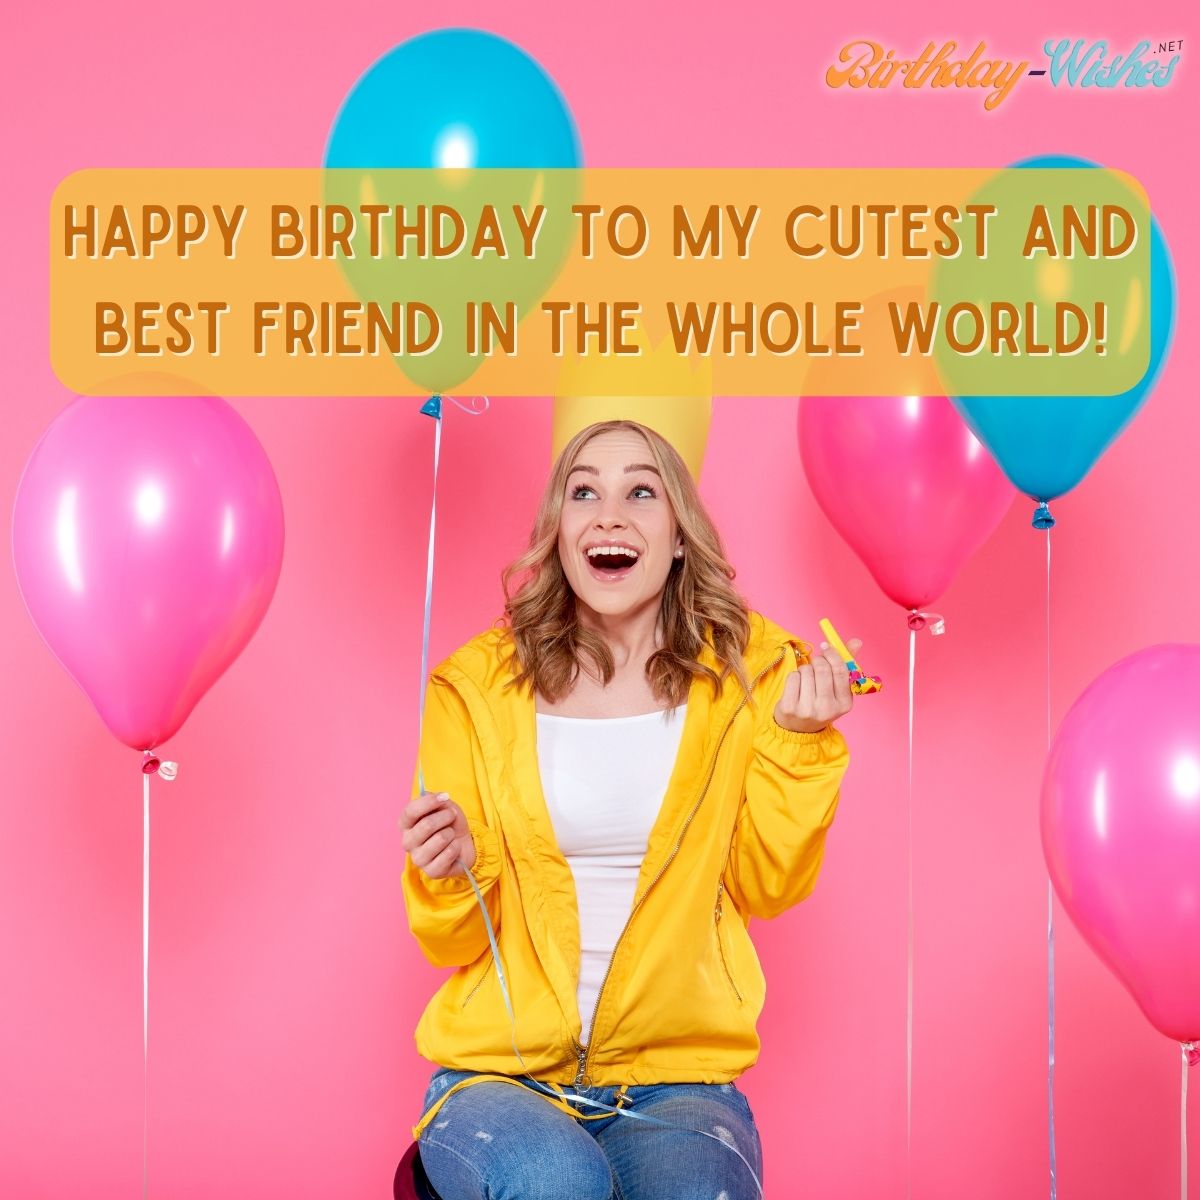 happy birthday cute friend image with balloons